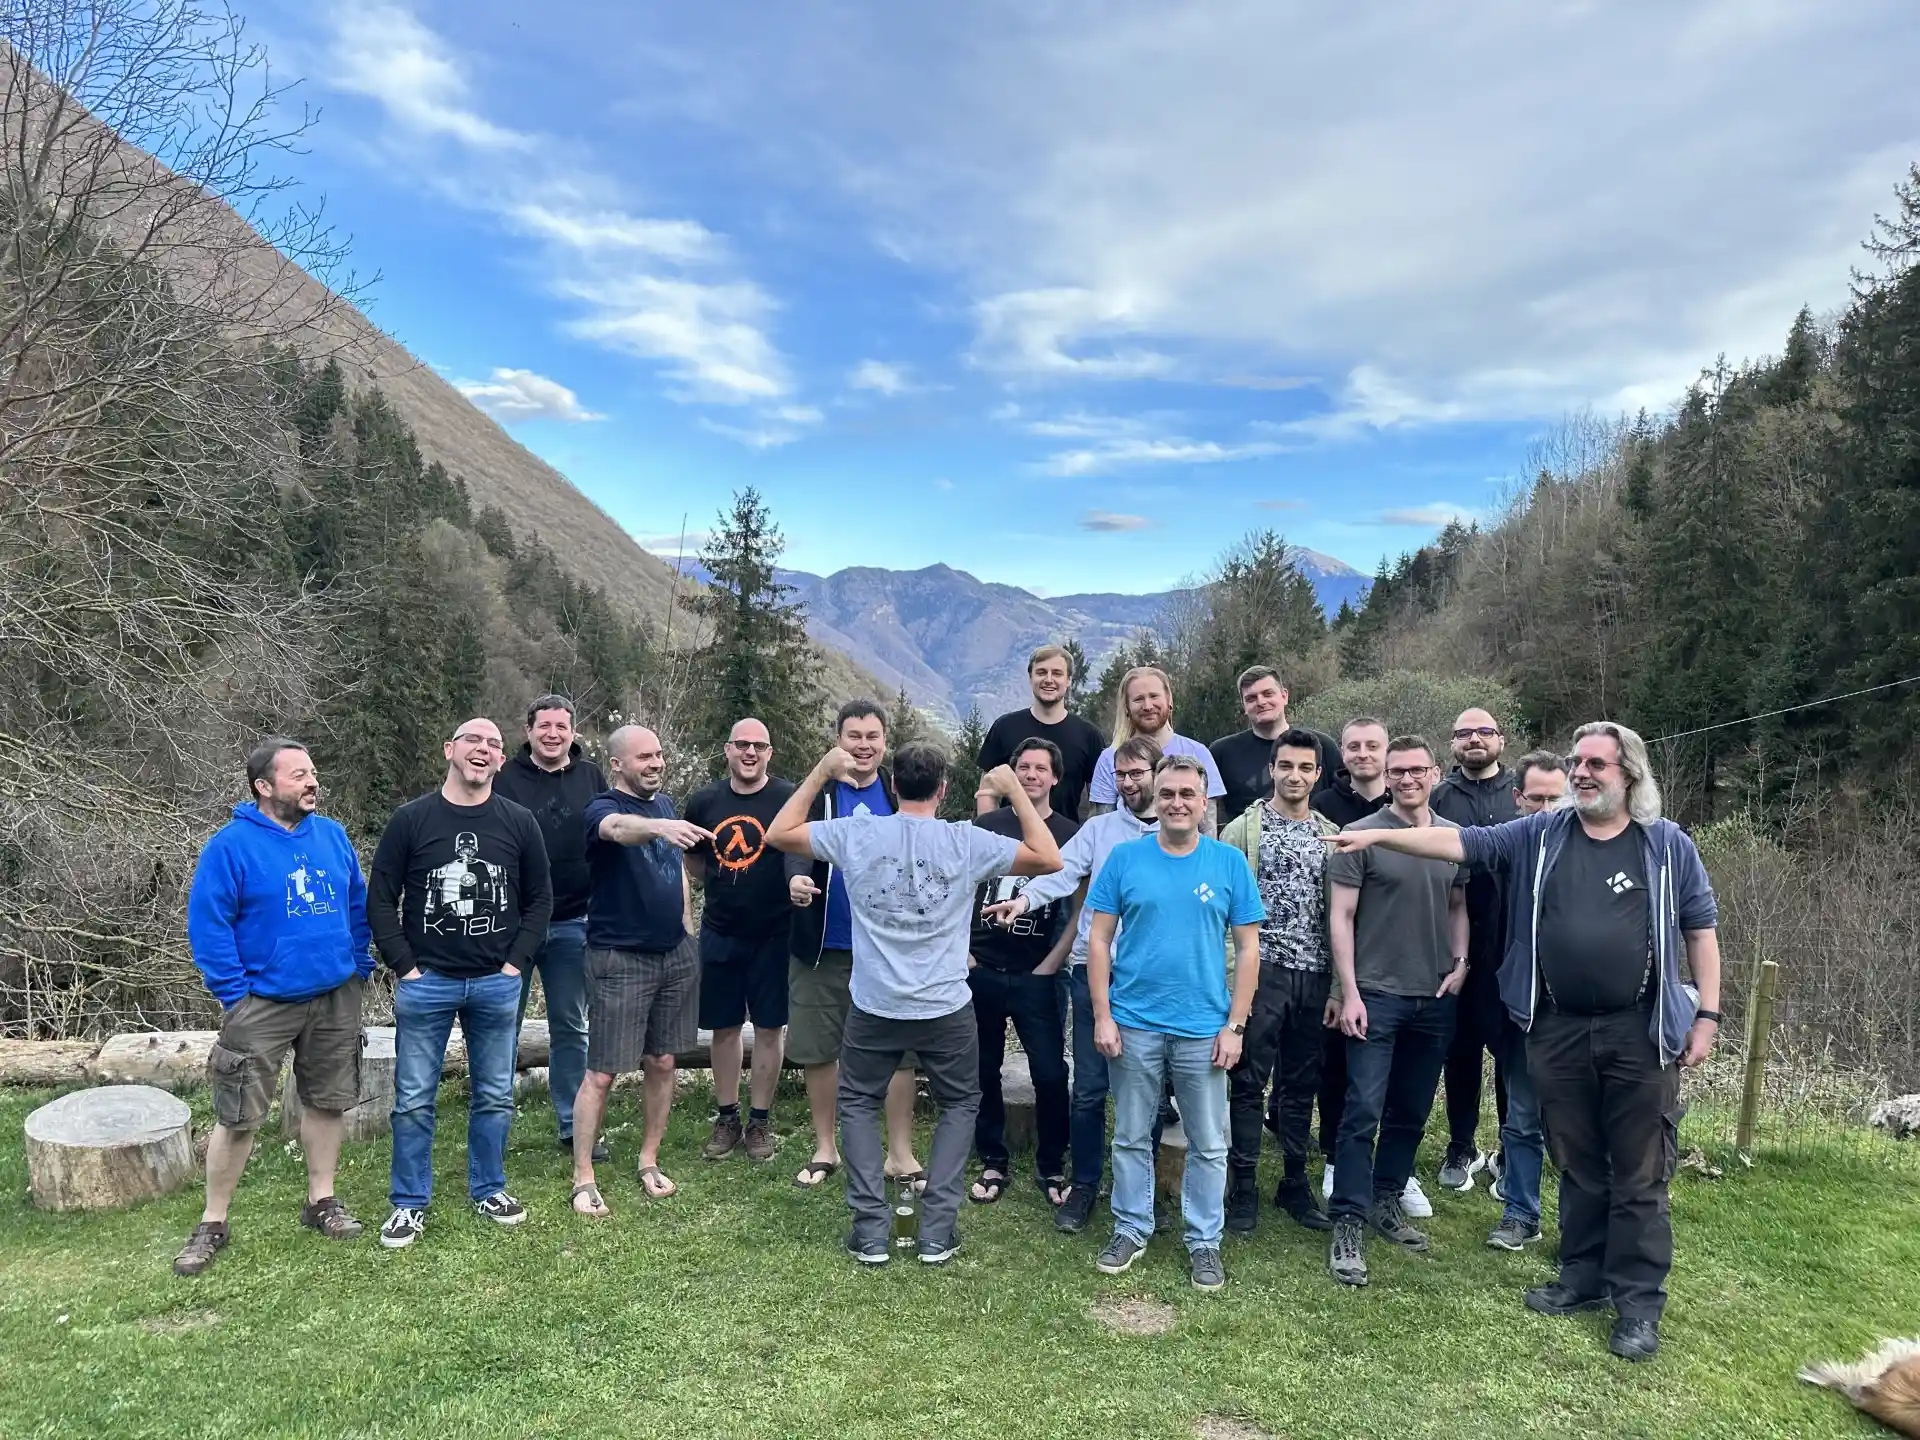 Team Kodi, 2023 - Kodi team members at Devcon 2023. in northern Italy. A group of people stand, spread out, facing the camera. Grass in front, but mountains soar in the background behind this motley crew of technological reprobates. One team member has his back turned to the camera, while people point to the logo on the back of his shirt: the numbers 20, signifying the 20th anniversary of XBMC/Kodi, but made up of the names of all the people and companies that have helped us make this awesome software happen.